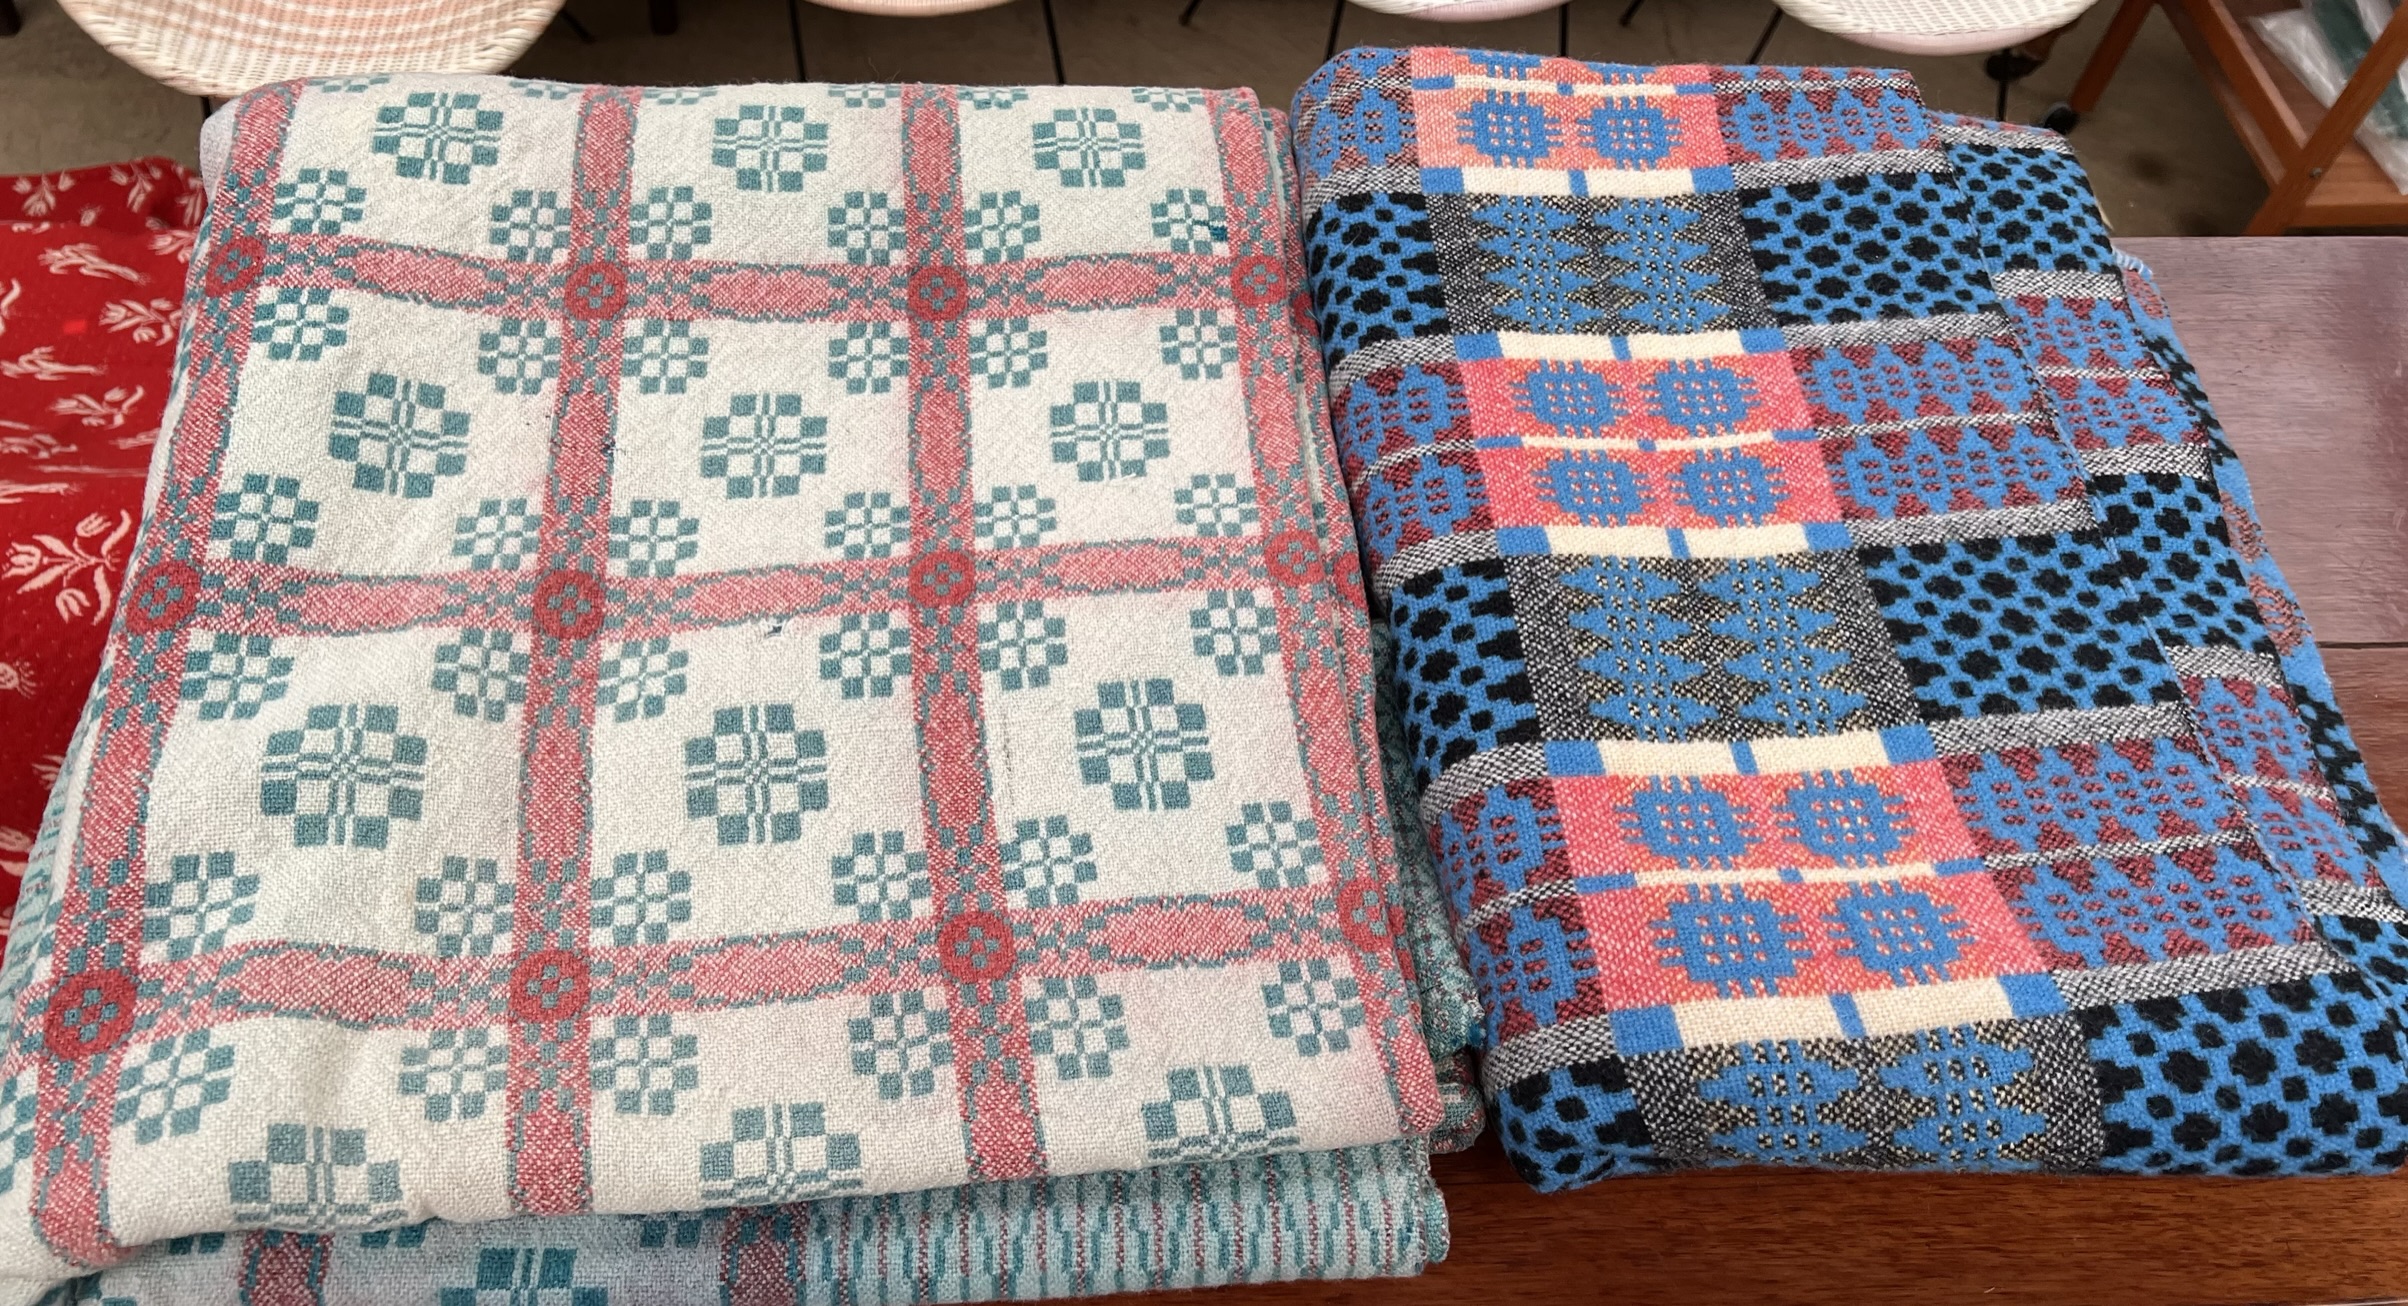 A Welsh blanket in blues and pinks together with another Welsh blanket